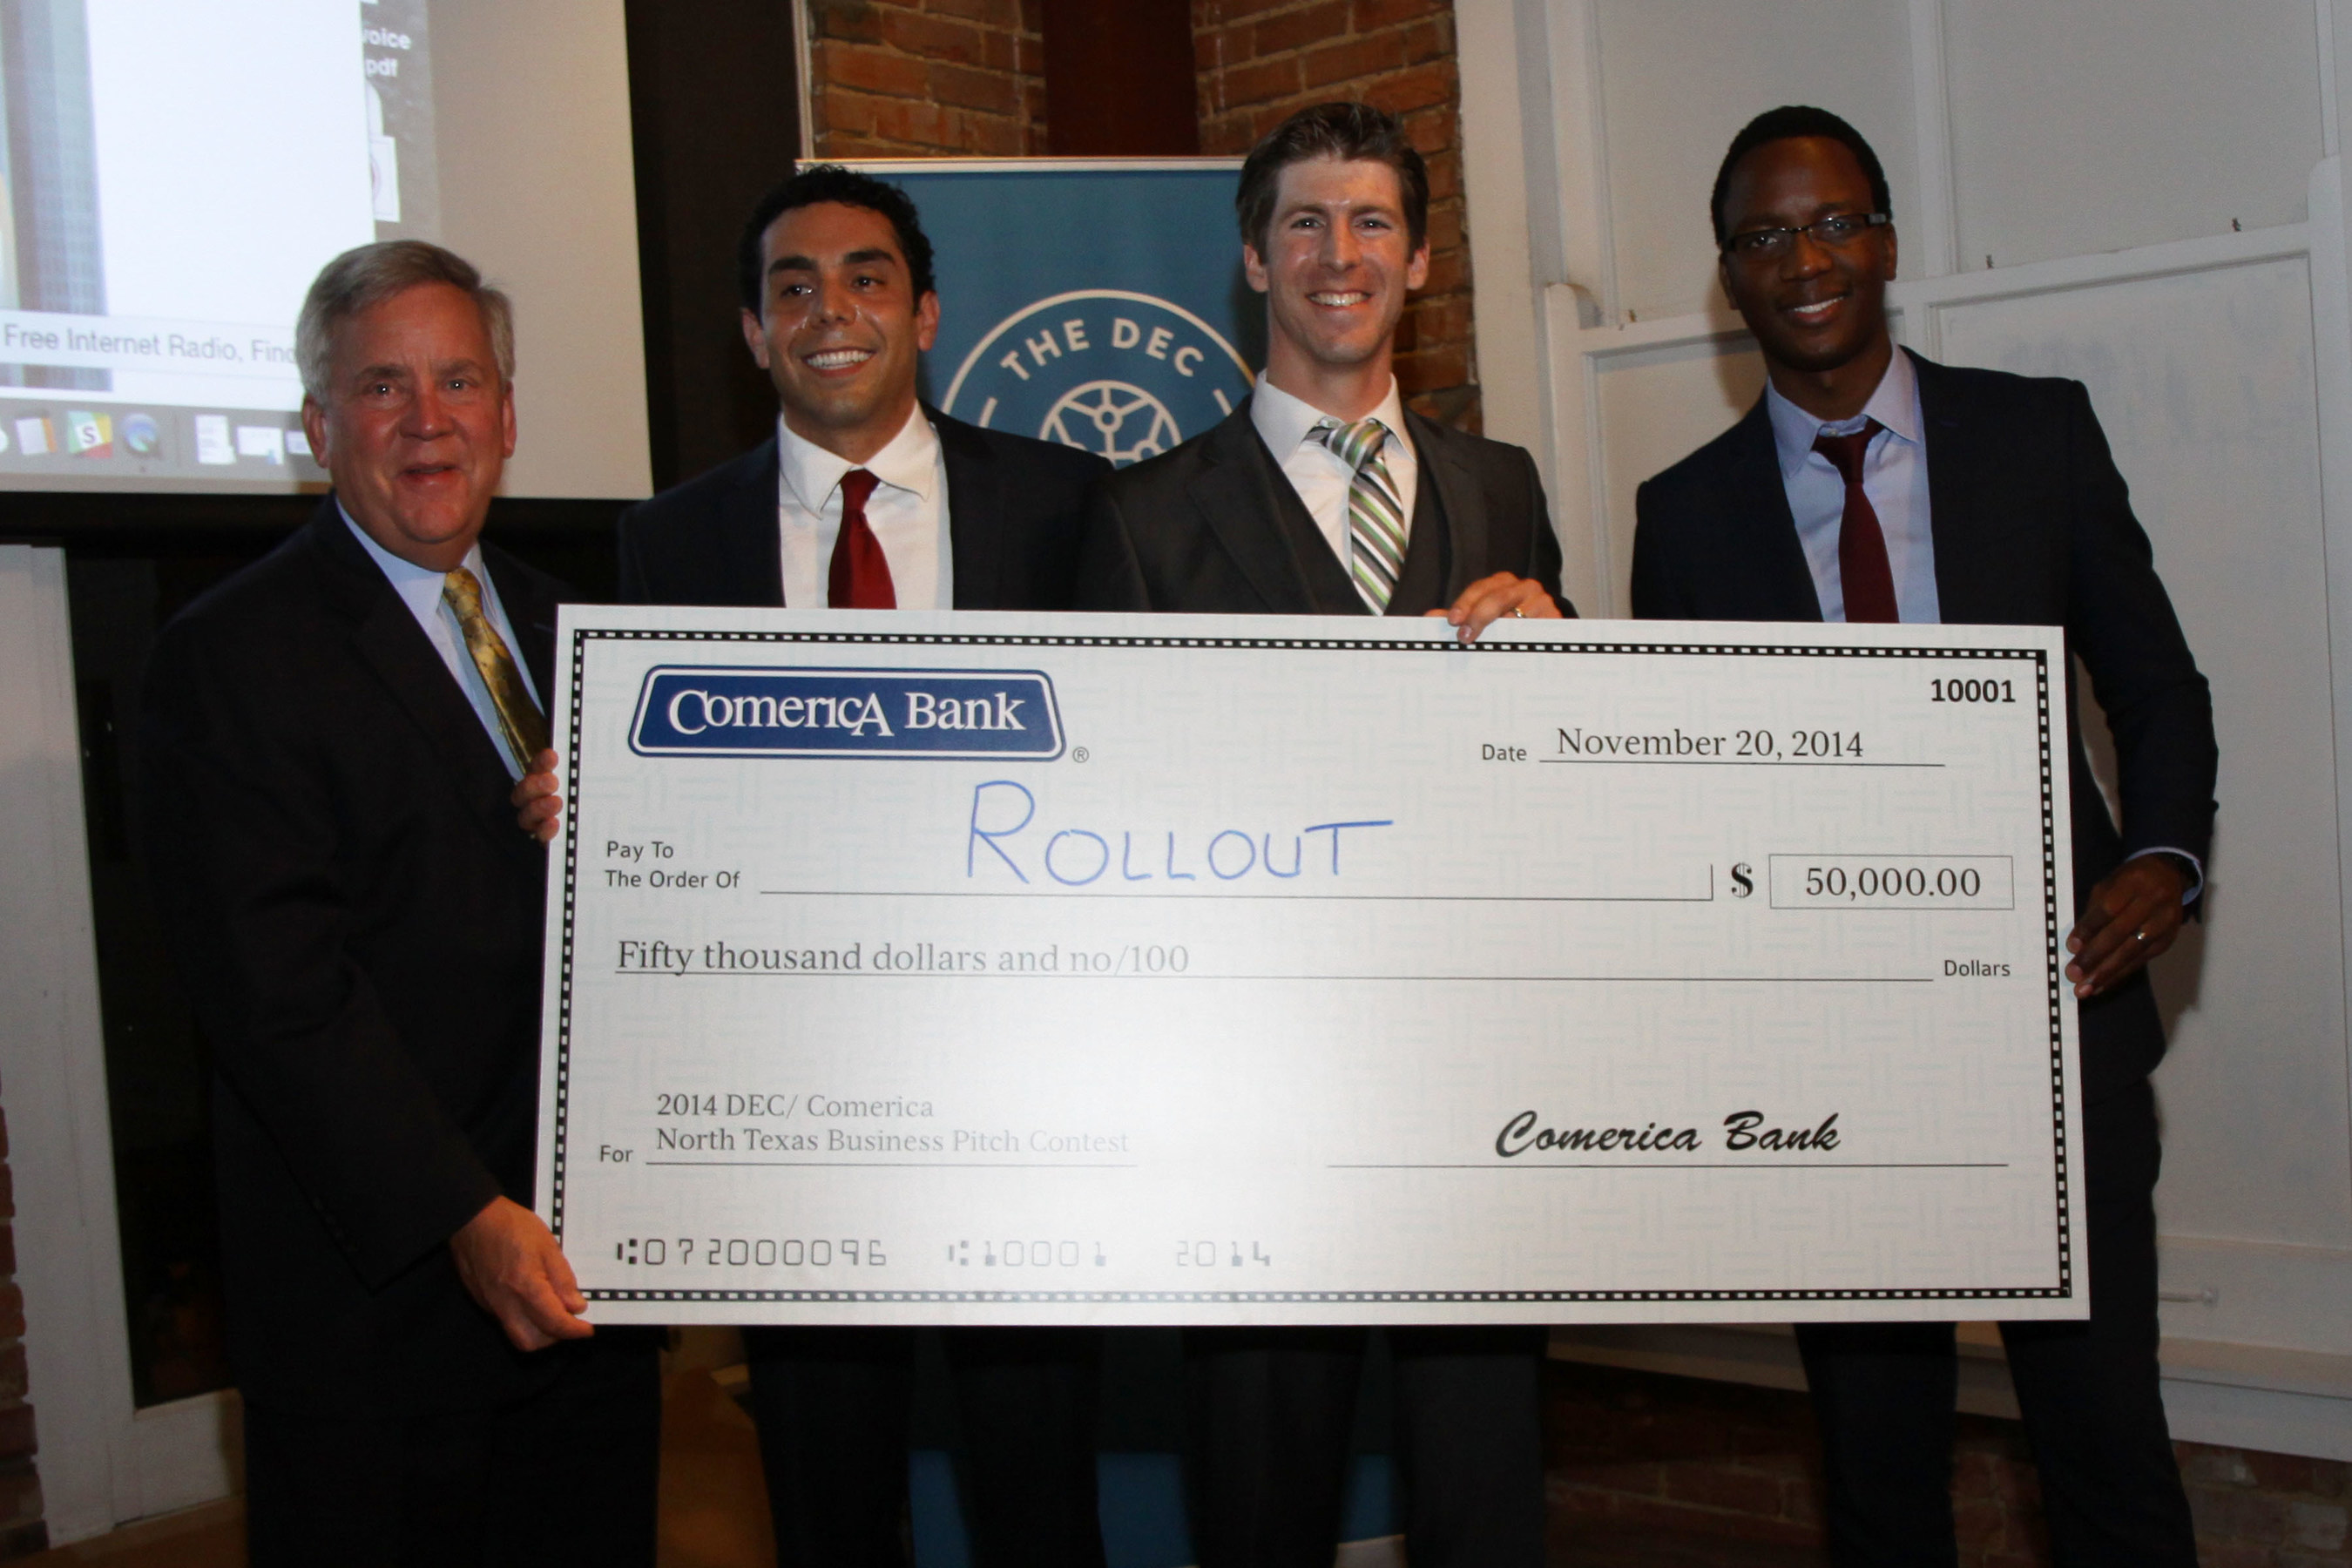 Pat Faubion, Texas Market President for Comerica Bank (far left), presents the $50,000 check to Rollout, Inc., winner of the inaugural DEC/ Comerica North Texas Business Pitch Contest at the Dallas Entrepreneur Center on Thursday evening, November 20, 2014. Rollout execs (from left to right) are Alejandro Jacobo, co-founder & CMO; Matt Hinson, founder & CEO; and Trevor Marimira, product development lead.